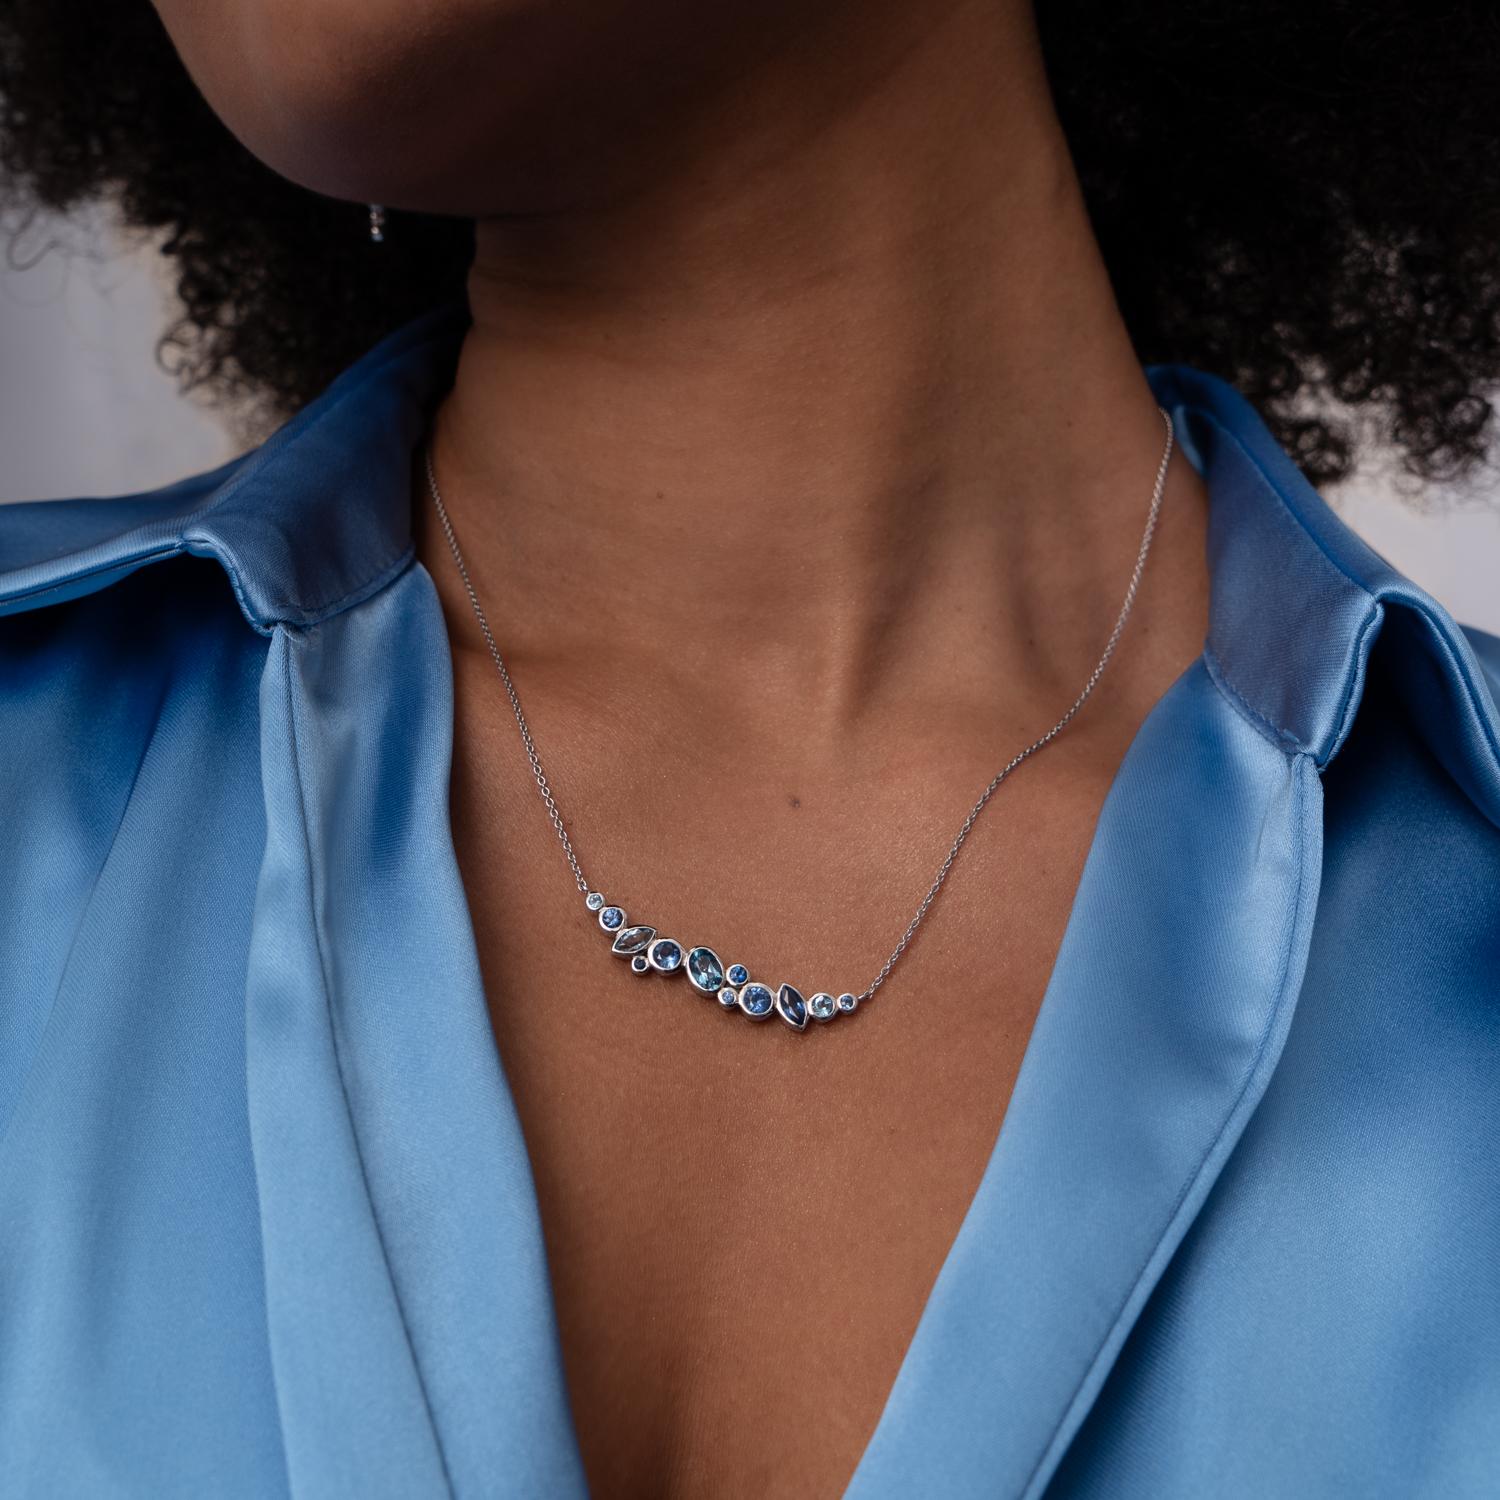 Luxuriously handcrafted in 18k white gold, this elegant Cascade pendant features a radiant ombre mix of 12 blue sapphires and aquamarines in different shapes including rounds, ovals and marquise. The colourful gemstones are encased in rub-over